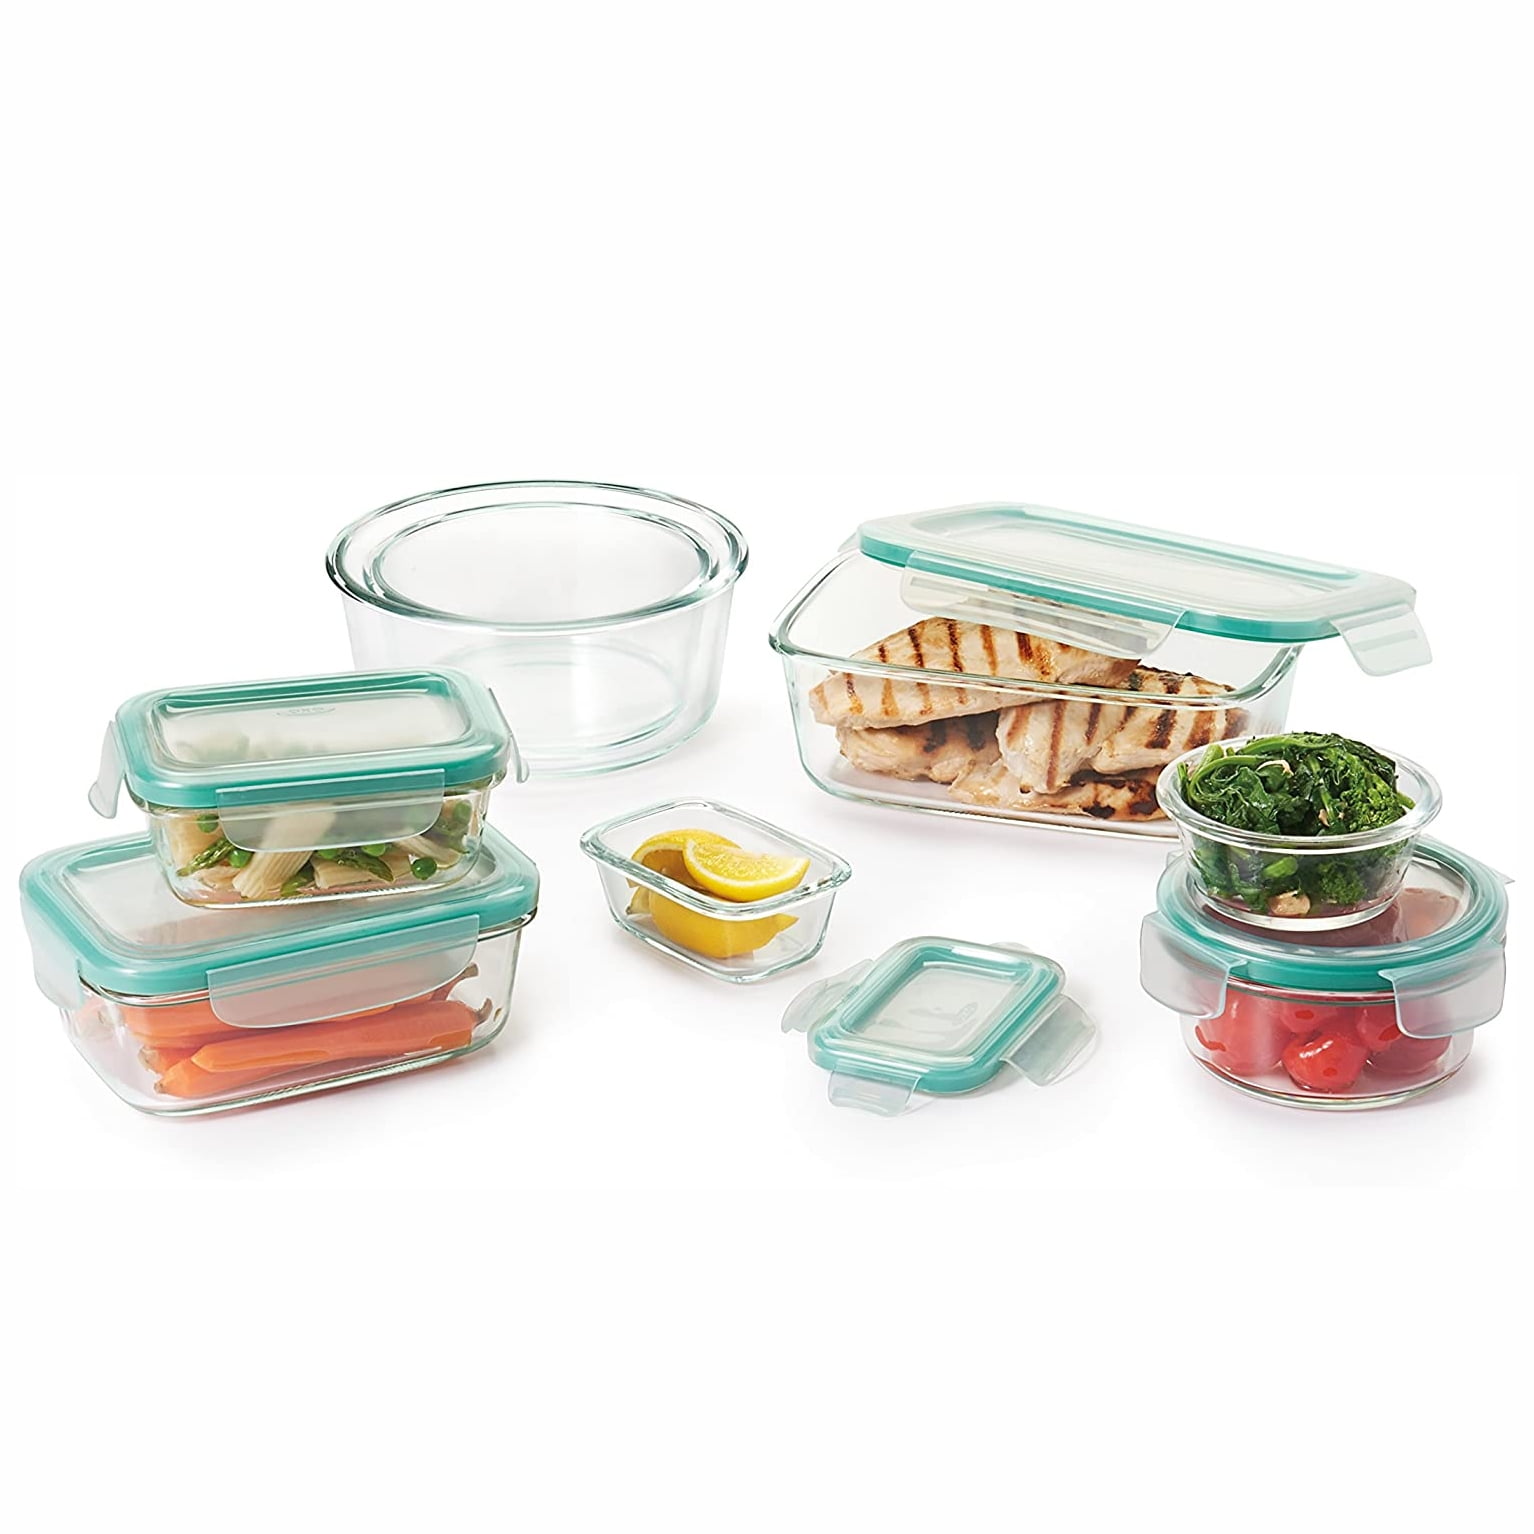 OXO Good Grips 14 Piece Clear Glass Bake, Serve, and Food Storage